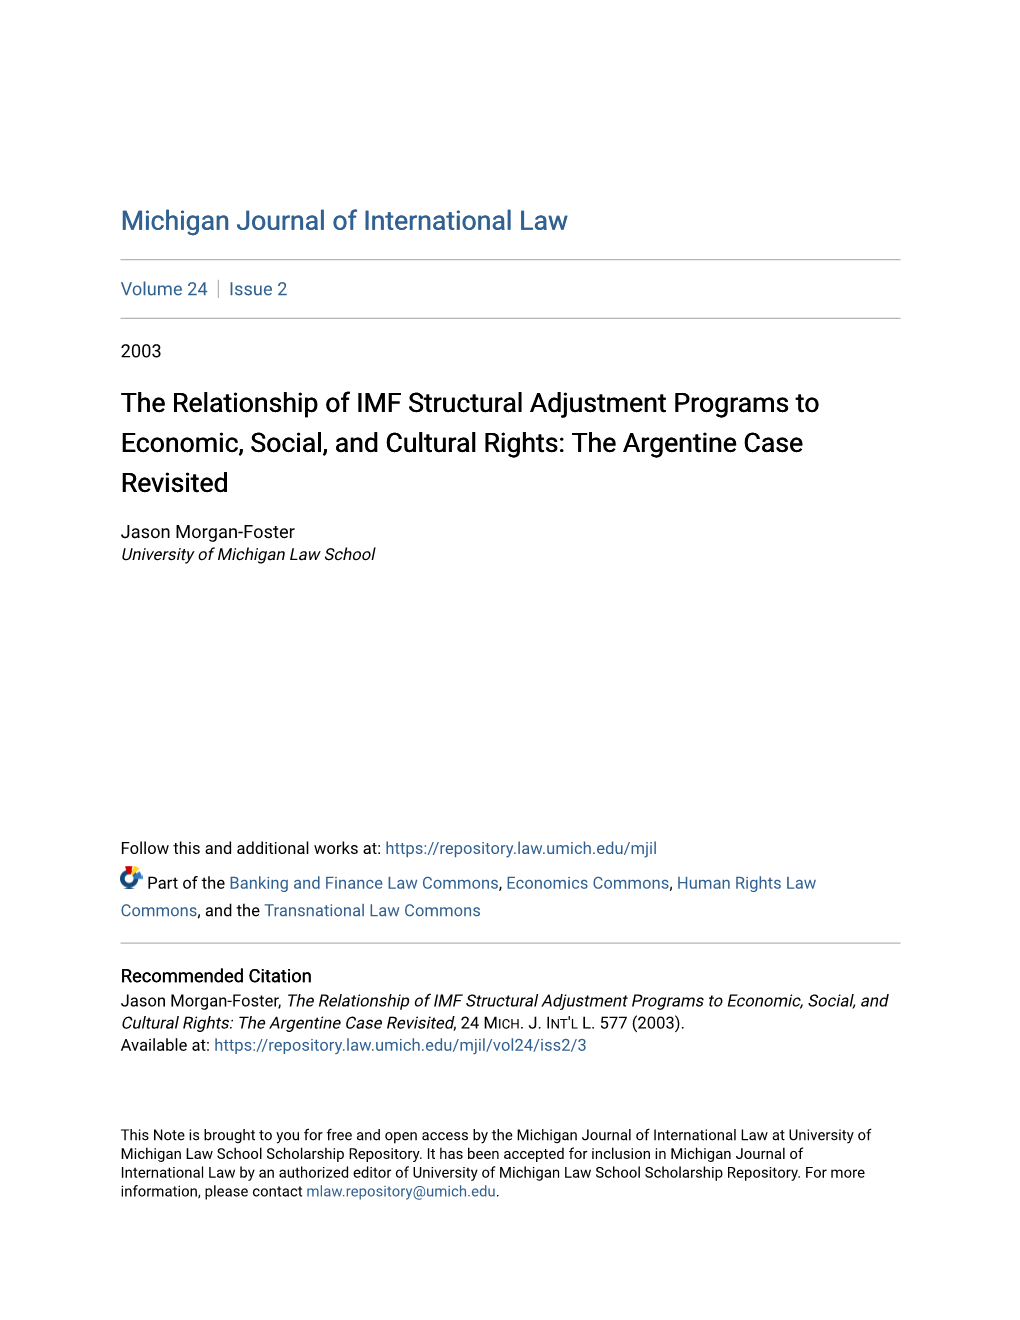 The Relationship of IMF Structural Adjustment Programs to Economic, Social, and Cultural Rights: the Argentine Case Revisited